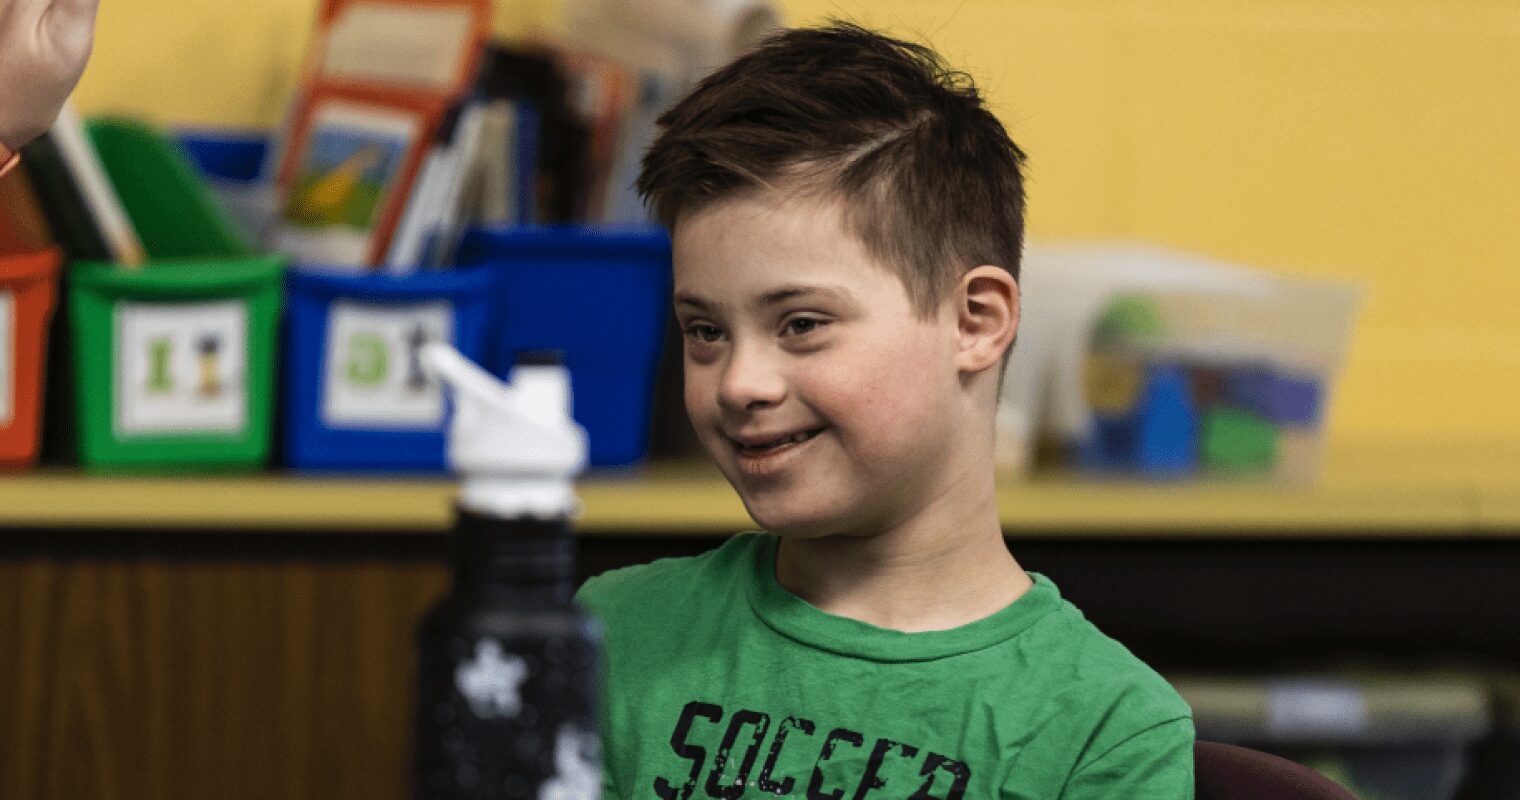 A young student in a green shirt smiles at something off camera in a classroom.